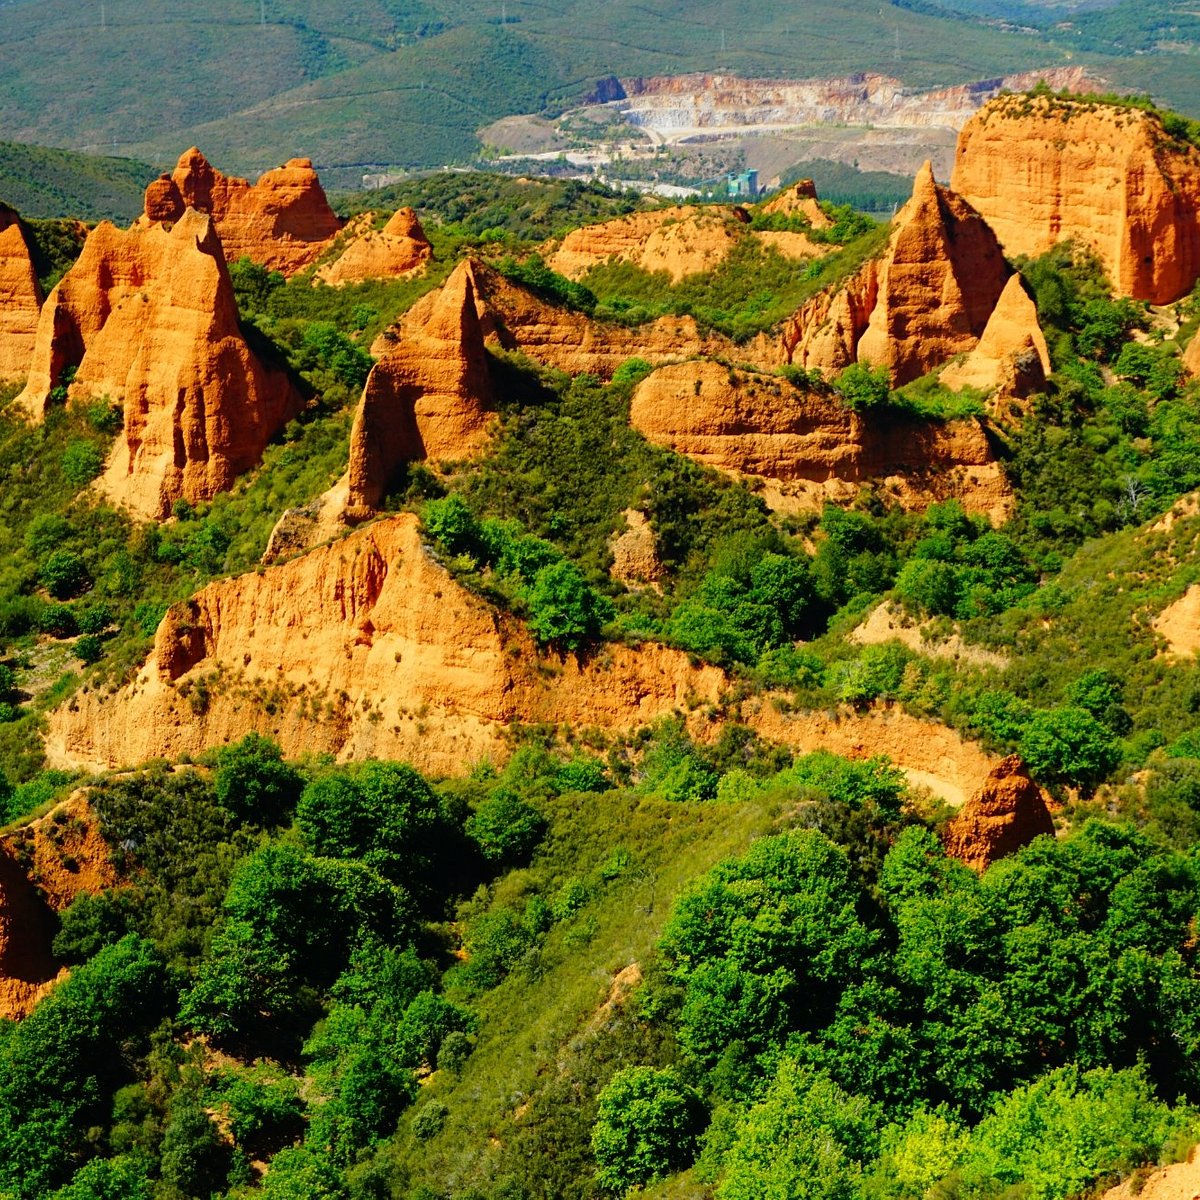 Las Médulas Natural Monument - 15 Most Beautiful Attractions in León